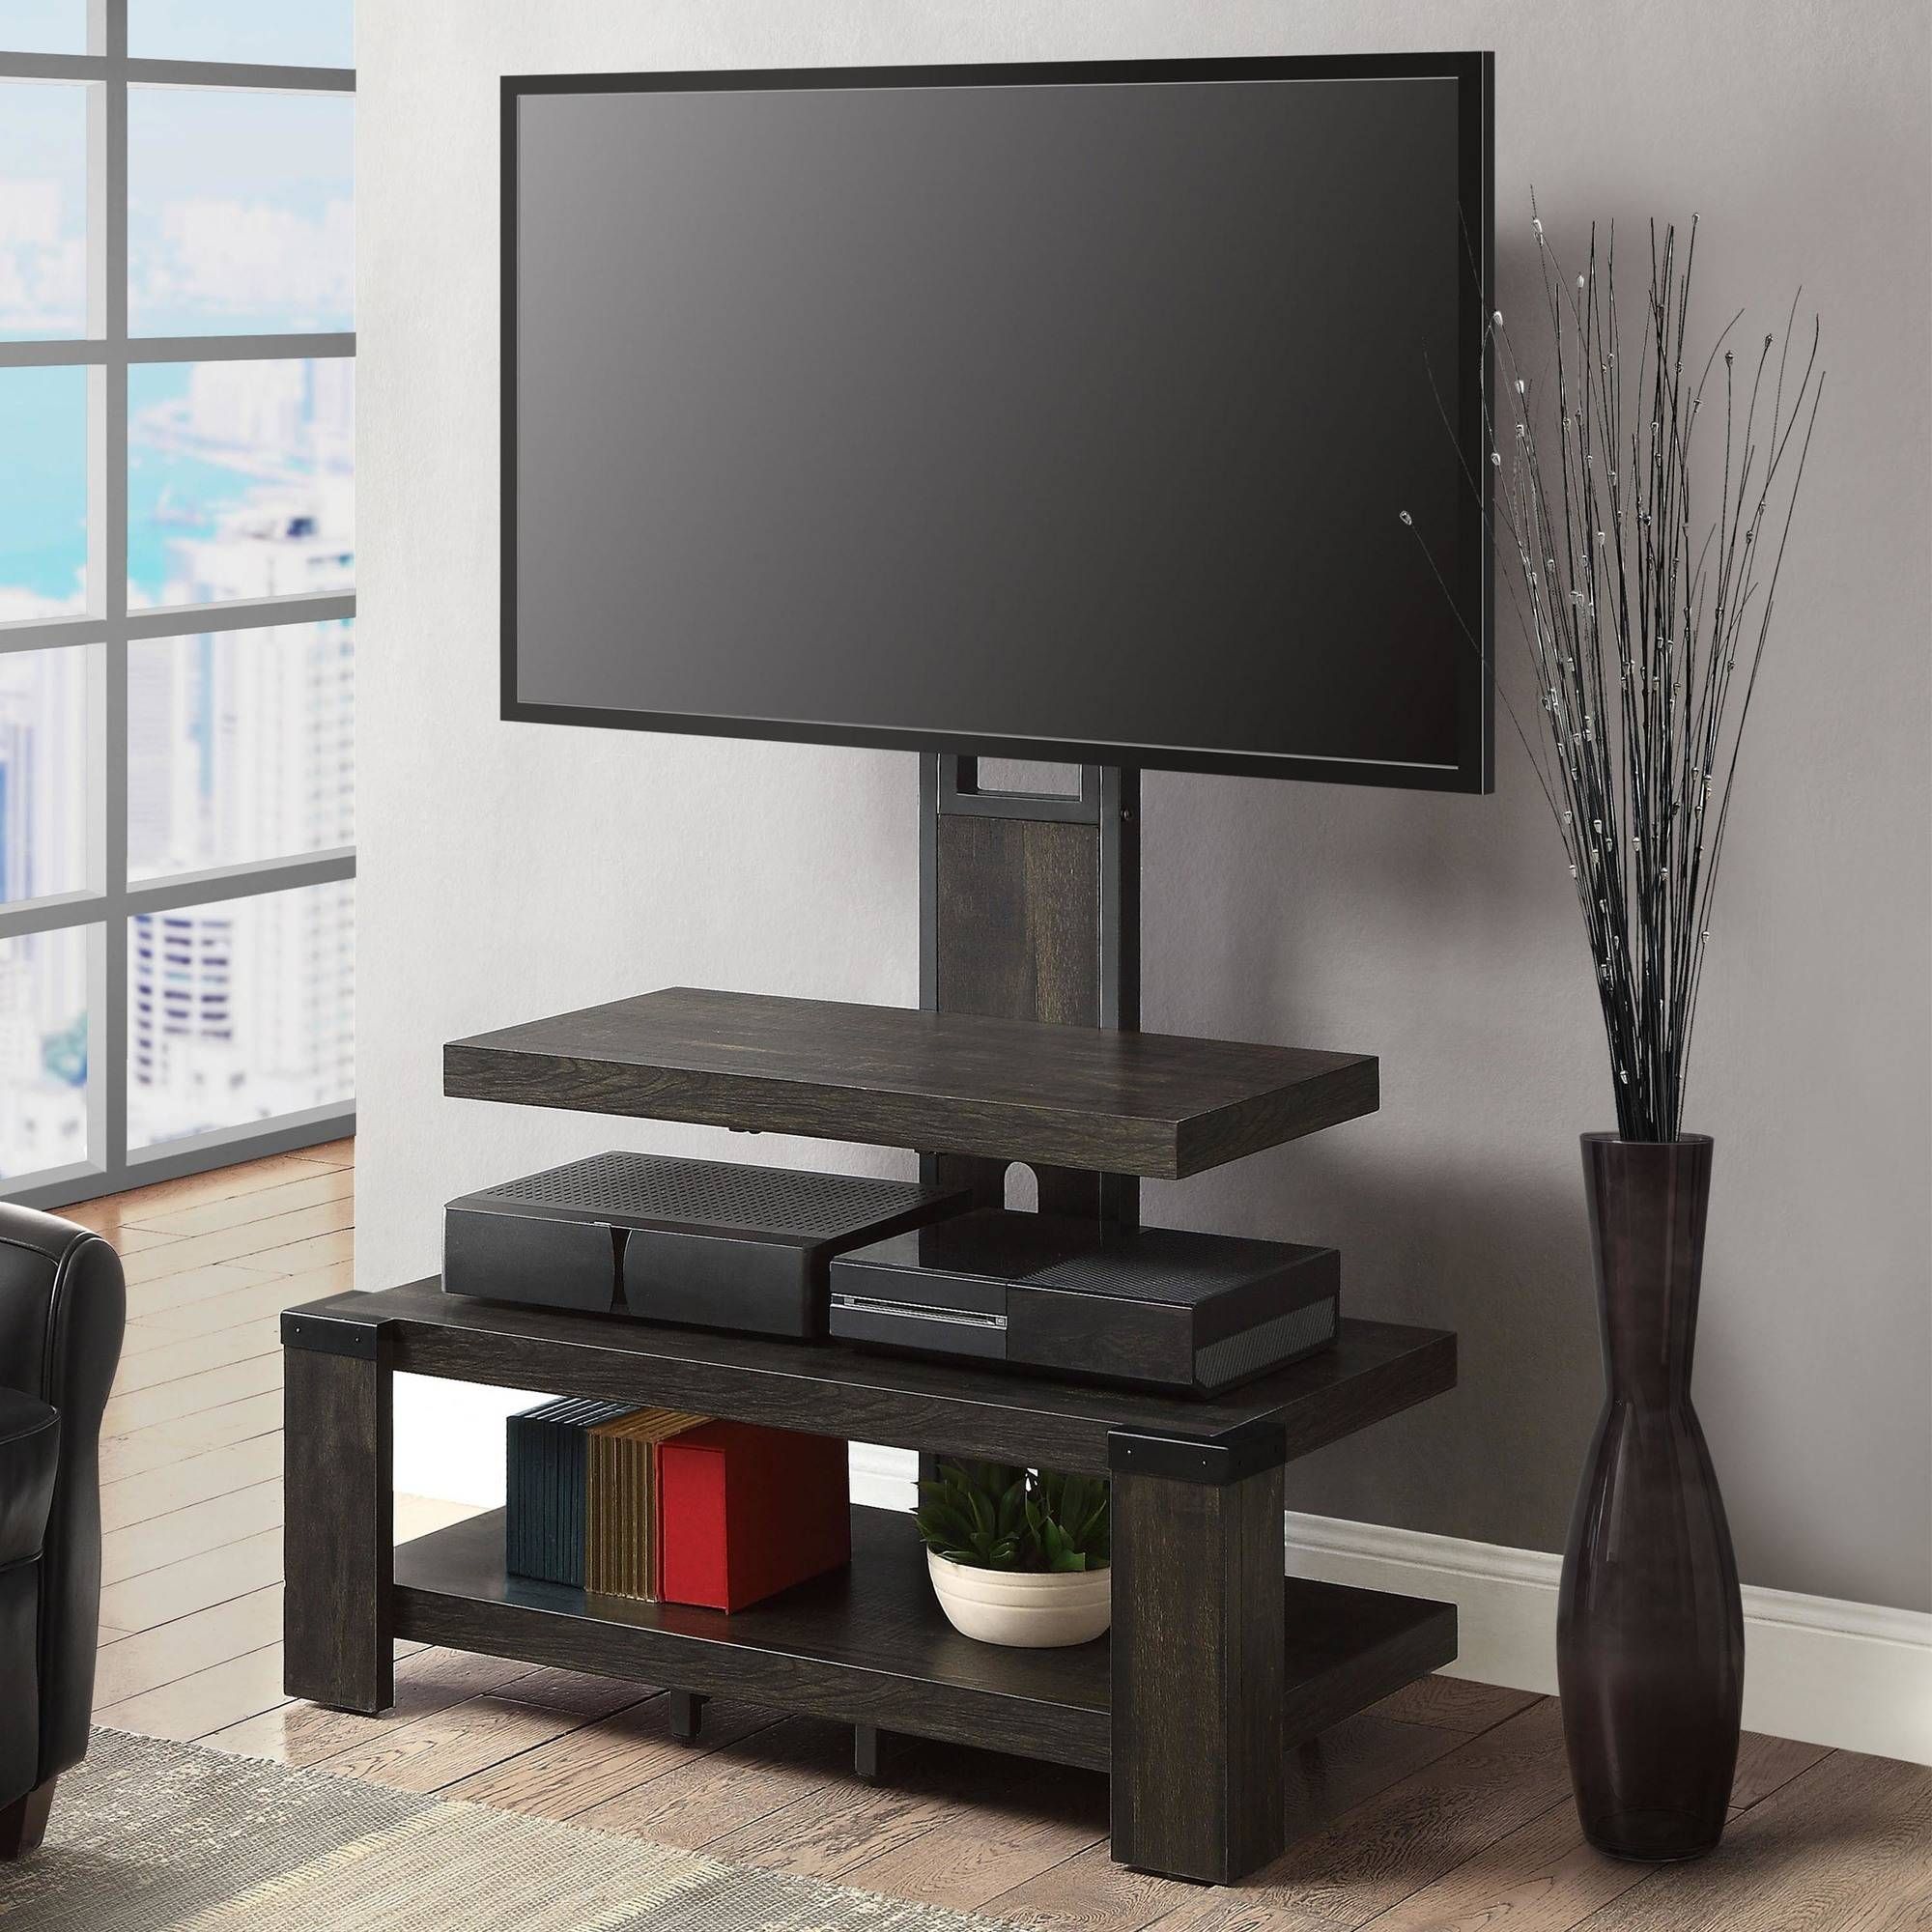 Whalen 3 Shelf Television Stand With Floater Mount For Tvs Throughout Wall Mounted Tv Cabinets For Flat Screens (View 15 of 15)